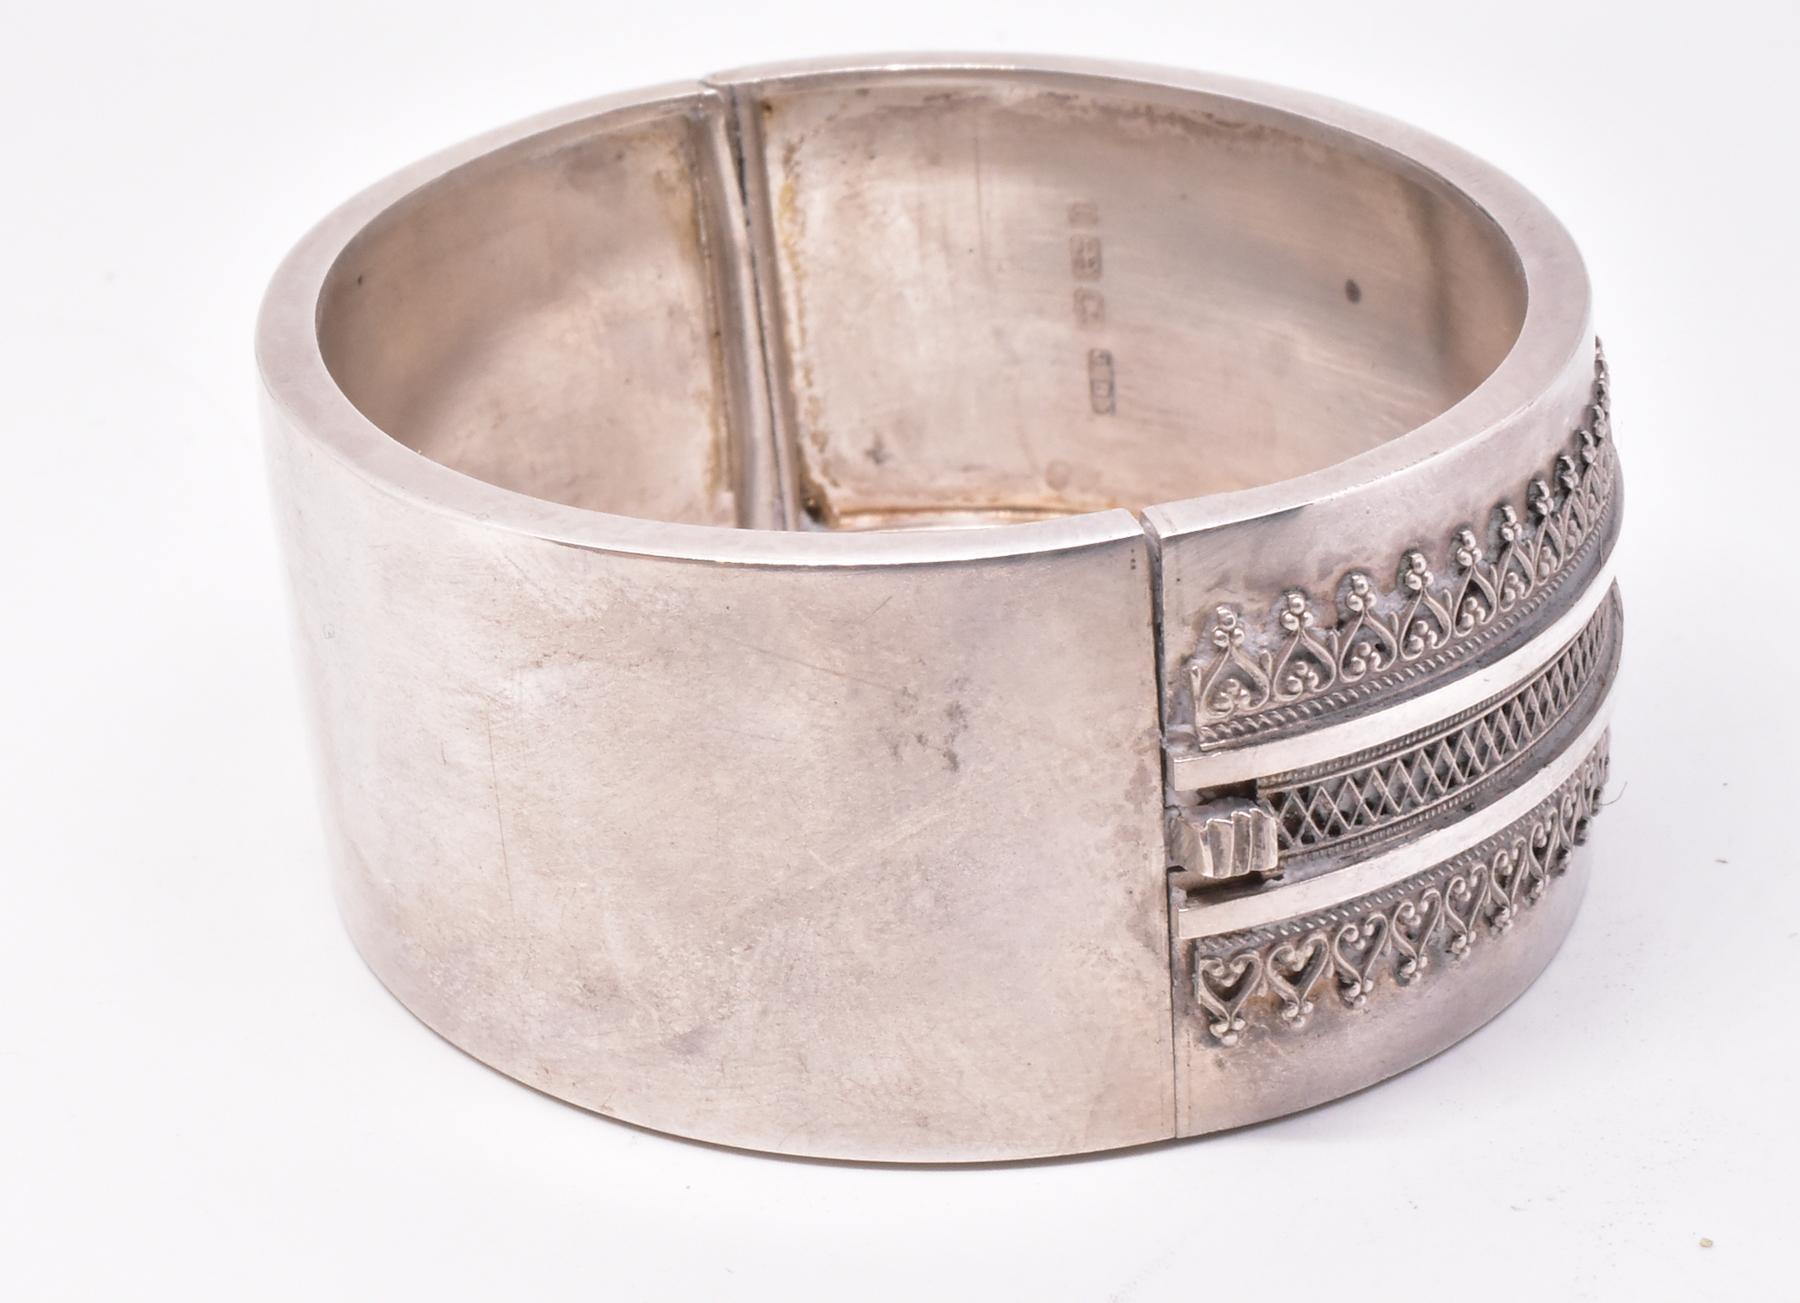 Classical Victorian hallmarked bangle bracelet with three rows of tiny fleurons and X shaped patterns running horizontally across the bangle with reeding in between. Our bracelet is hallmarked 1883 Birmingham and is in pristine condition. It is